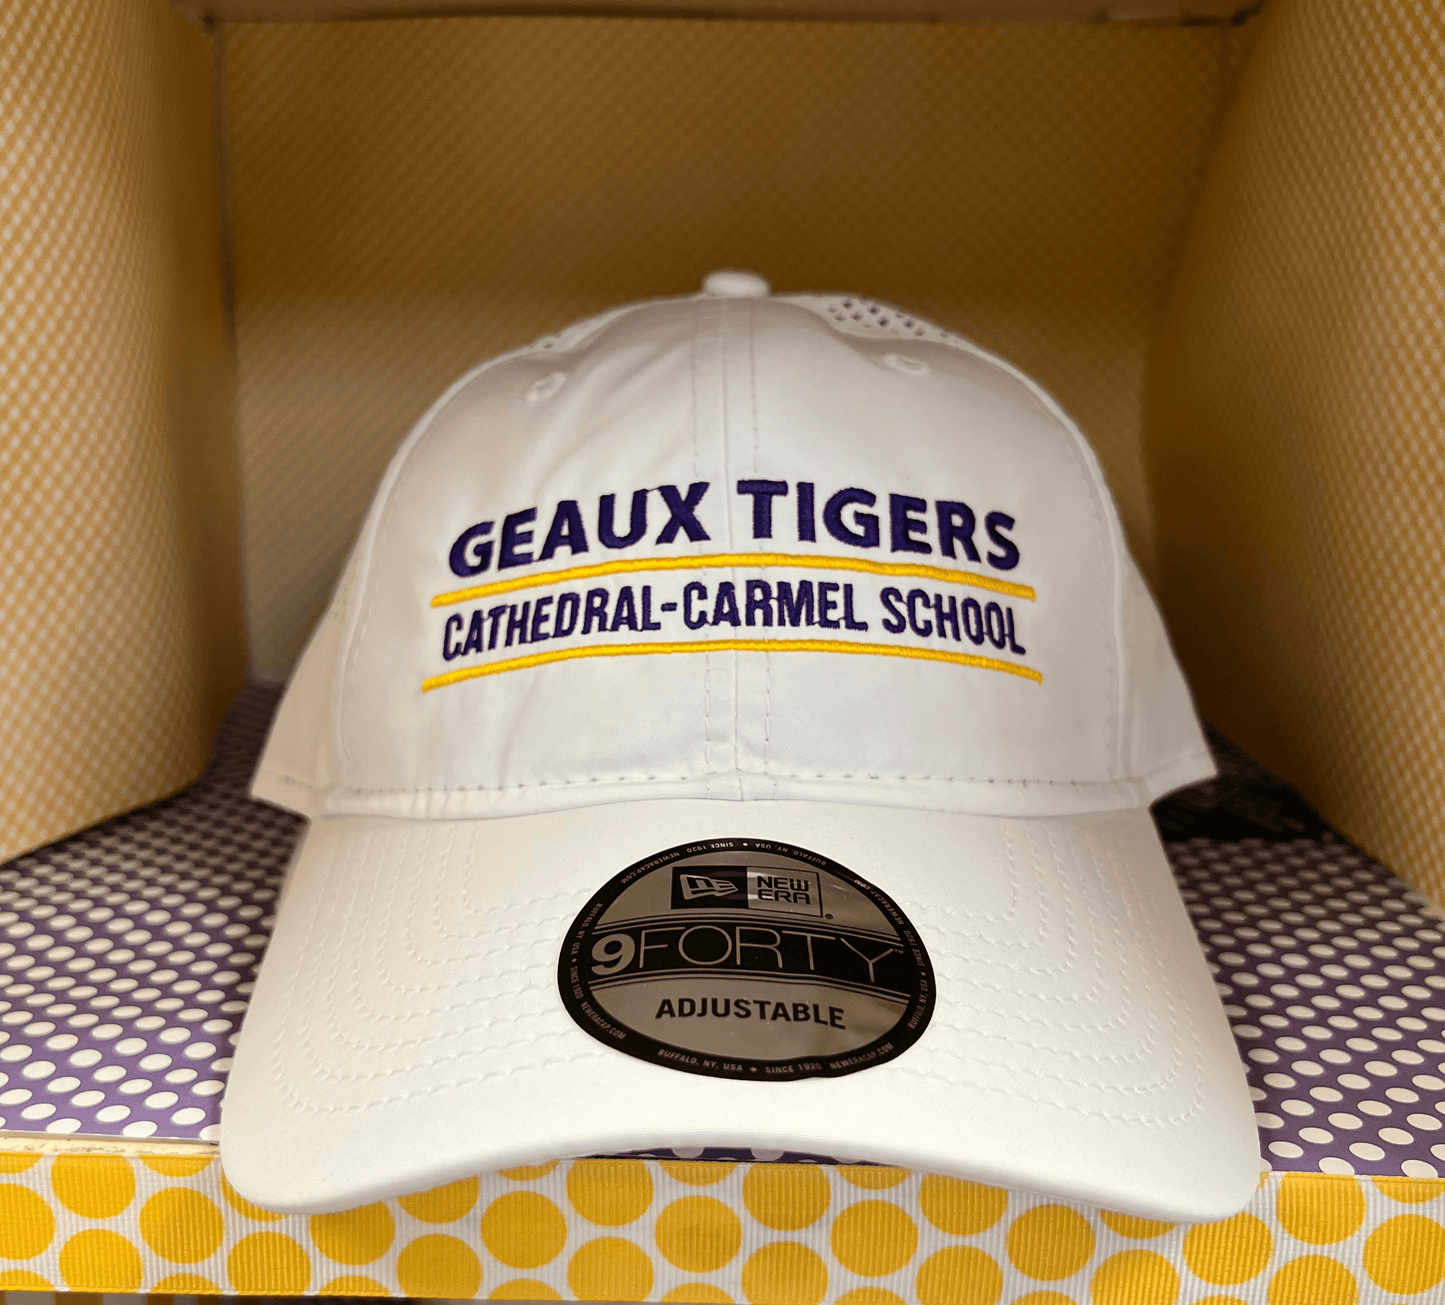 WHITE "GEAUX TIGERS" HAT